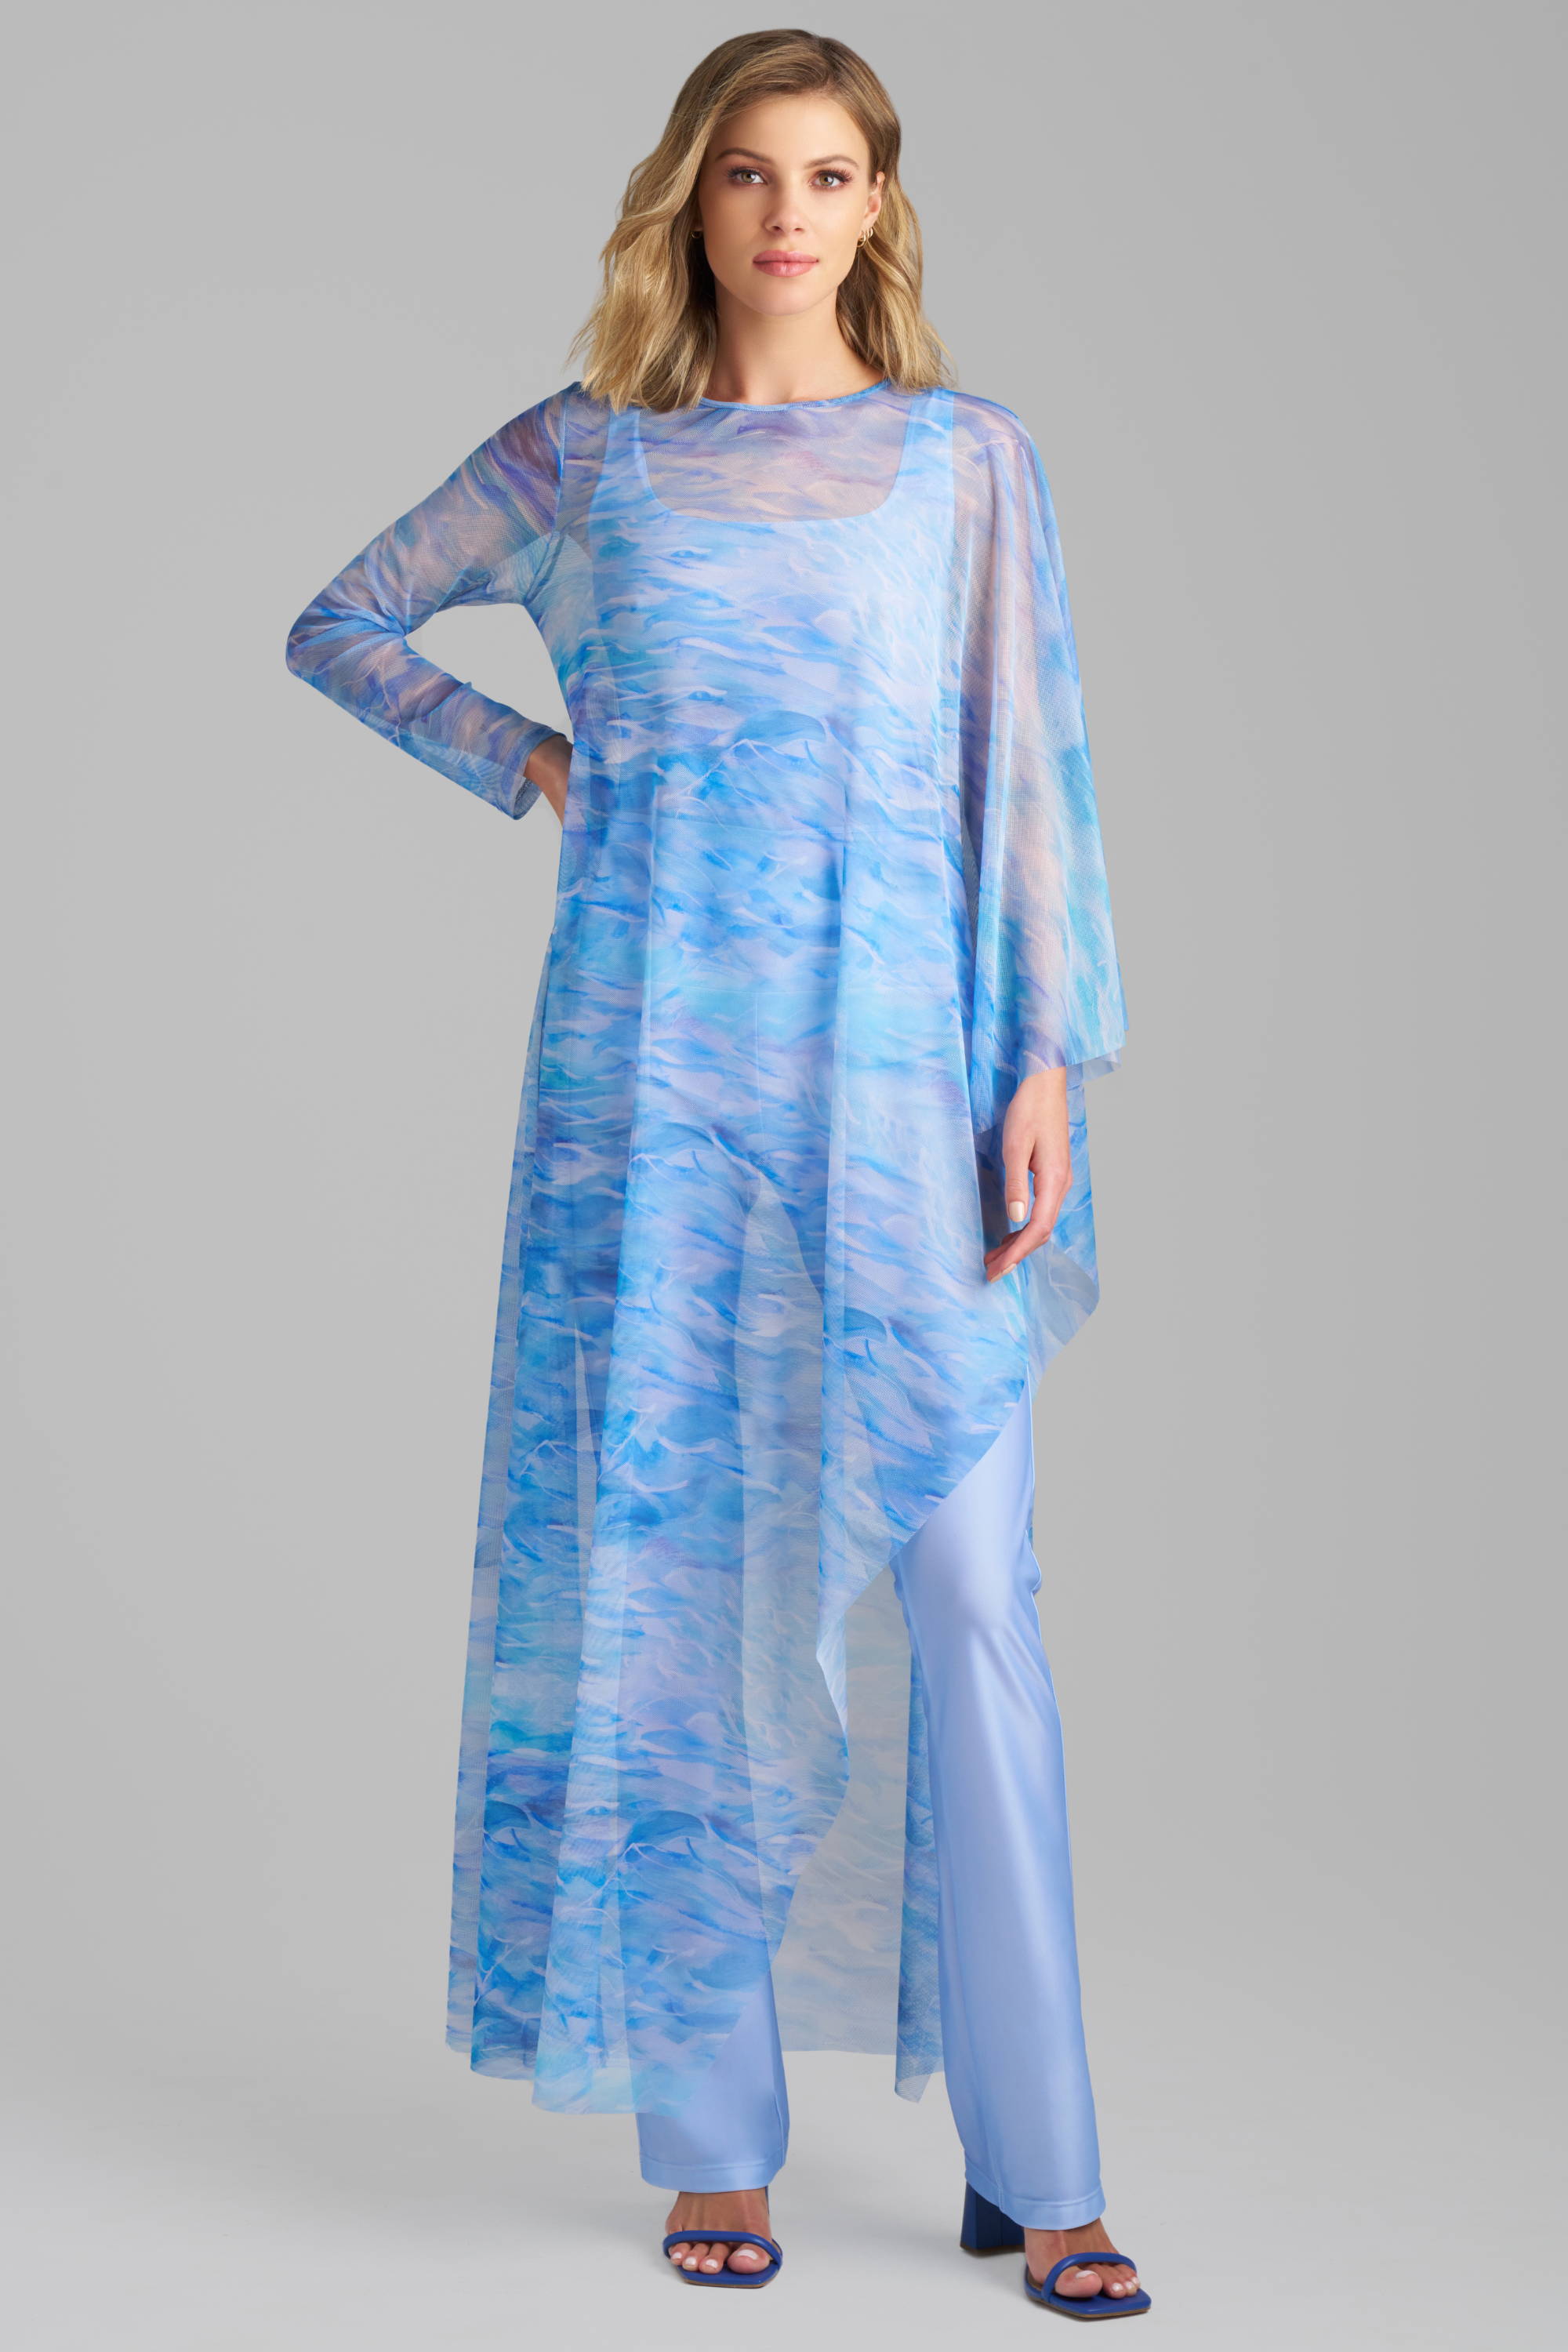 Woman wearing blue mesh kaftan poncho cover up over periwinkle stretch knit tank top and pants by Ala von Auersperg